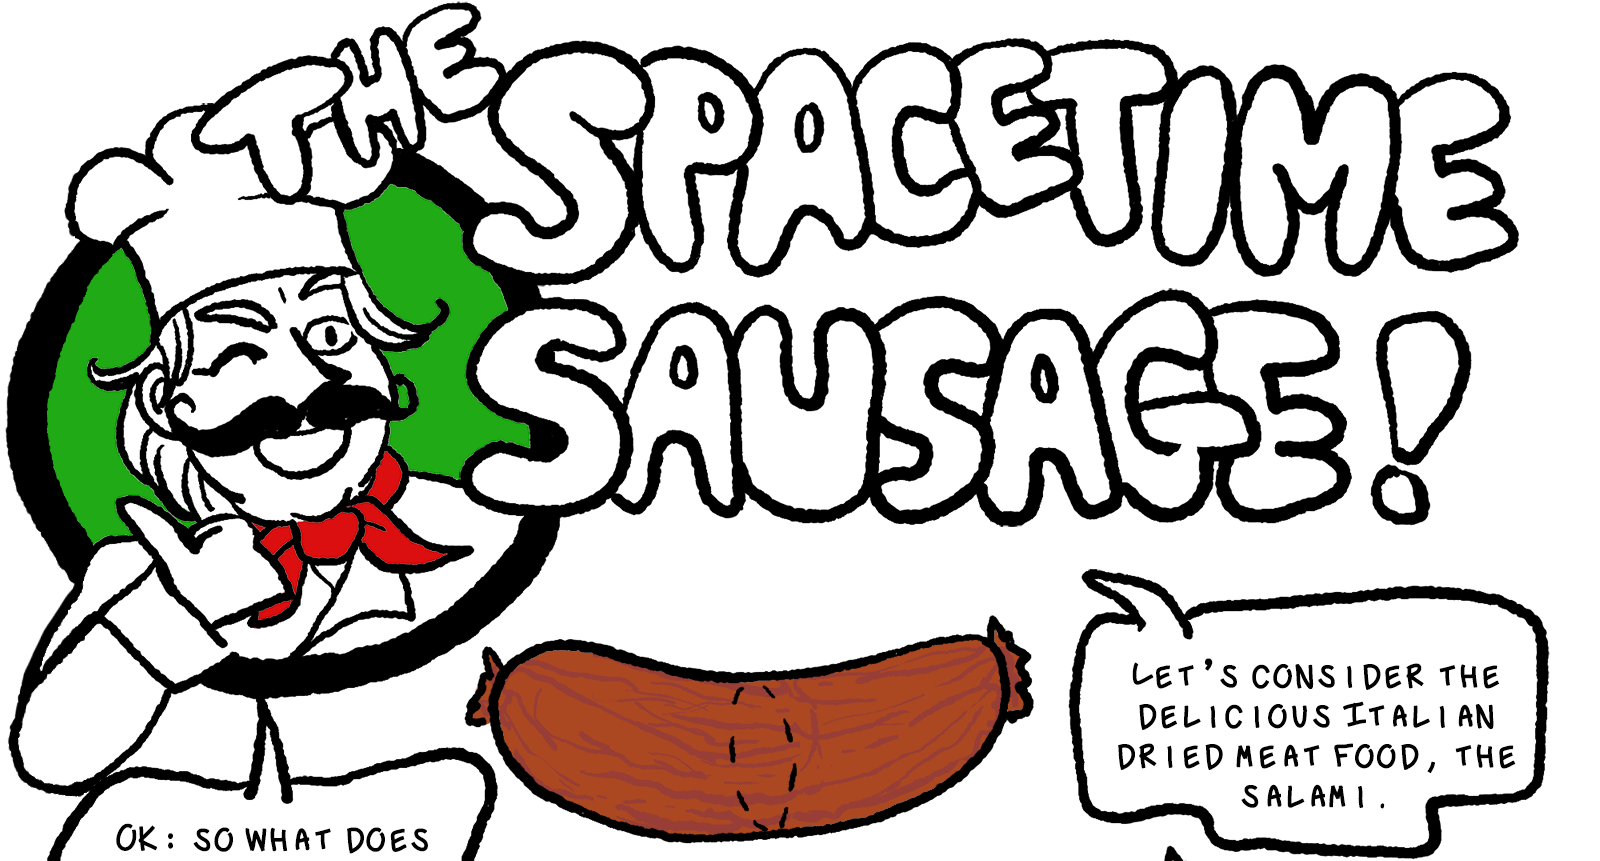 In big bubble letters, the title reads The Spacetime Sausage with a logo that looks like the front of a can of tomato sauce. Elk is hanging out of a green circle giving a thumbs up and winking, wearing a chef outfit and a big curly mustache. The logo has the colors of the Italian flag. Below this is a drawing of a tube of salami. Elk says, Let's consider the delicious Italian dried meat food, the salami. He continues: Ok, so what does sausage have to do wtih anything, you may be wondering.